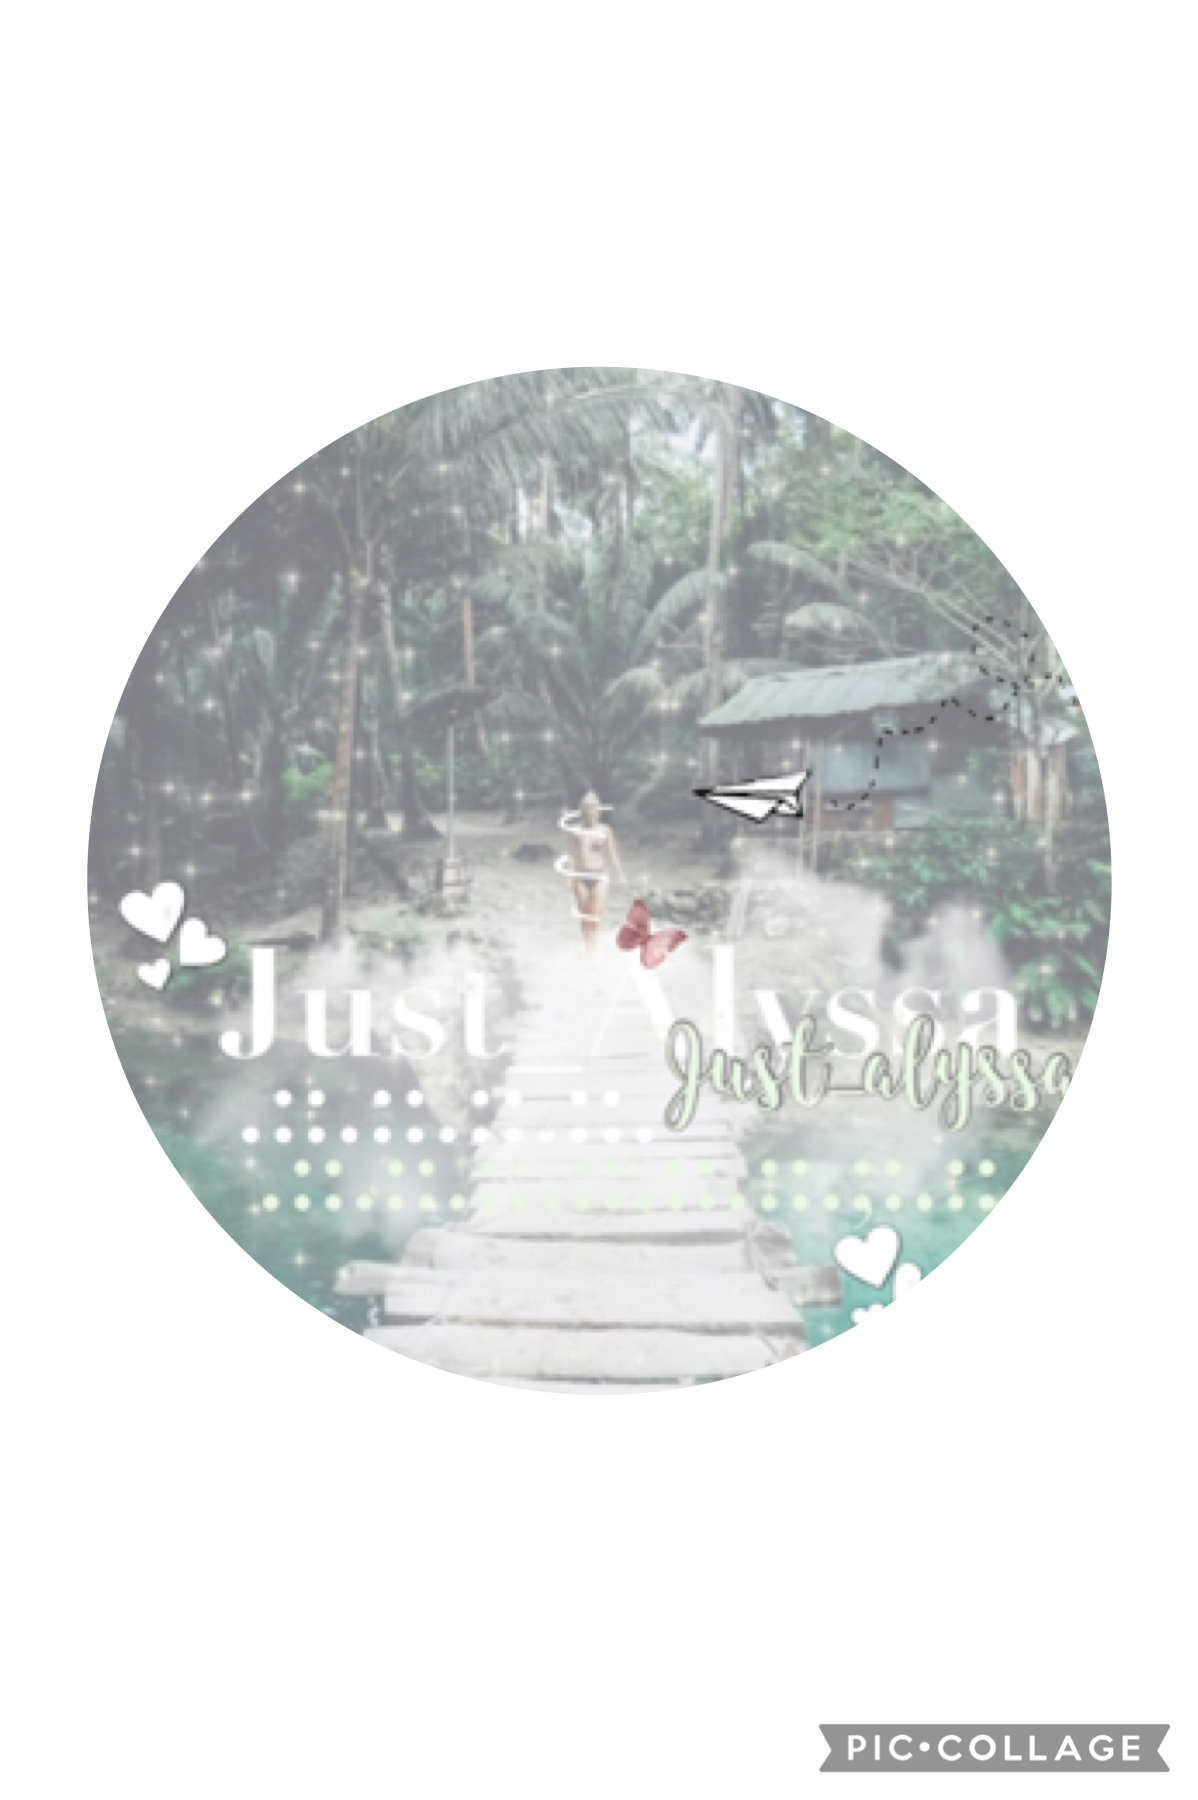 Icon for just_alyssa! Pls give creds if used!